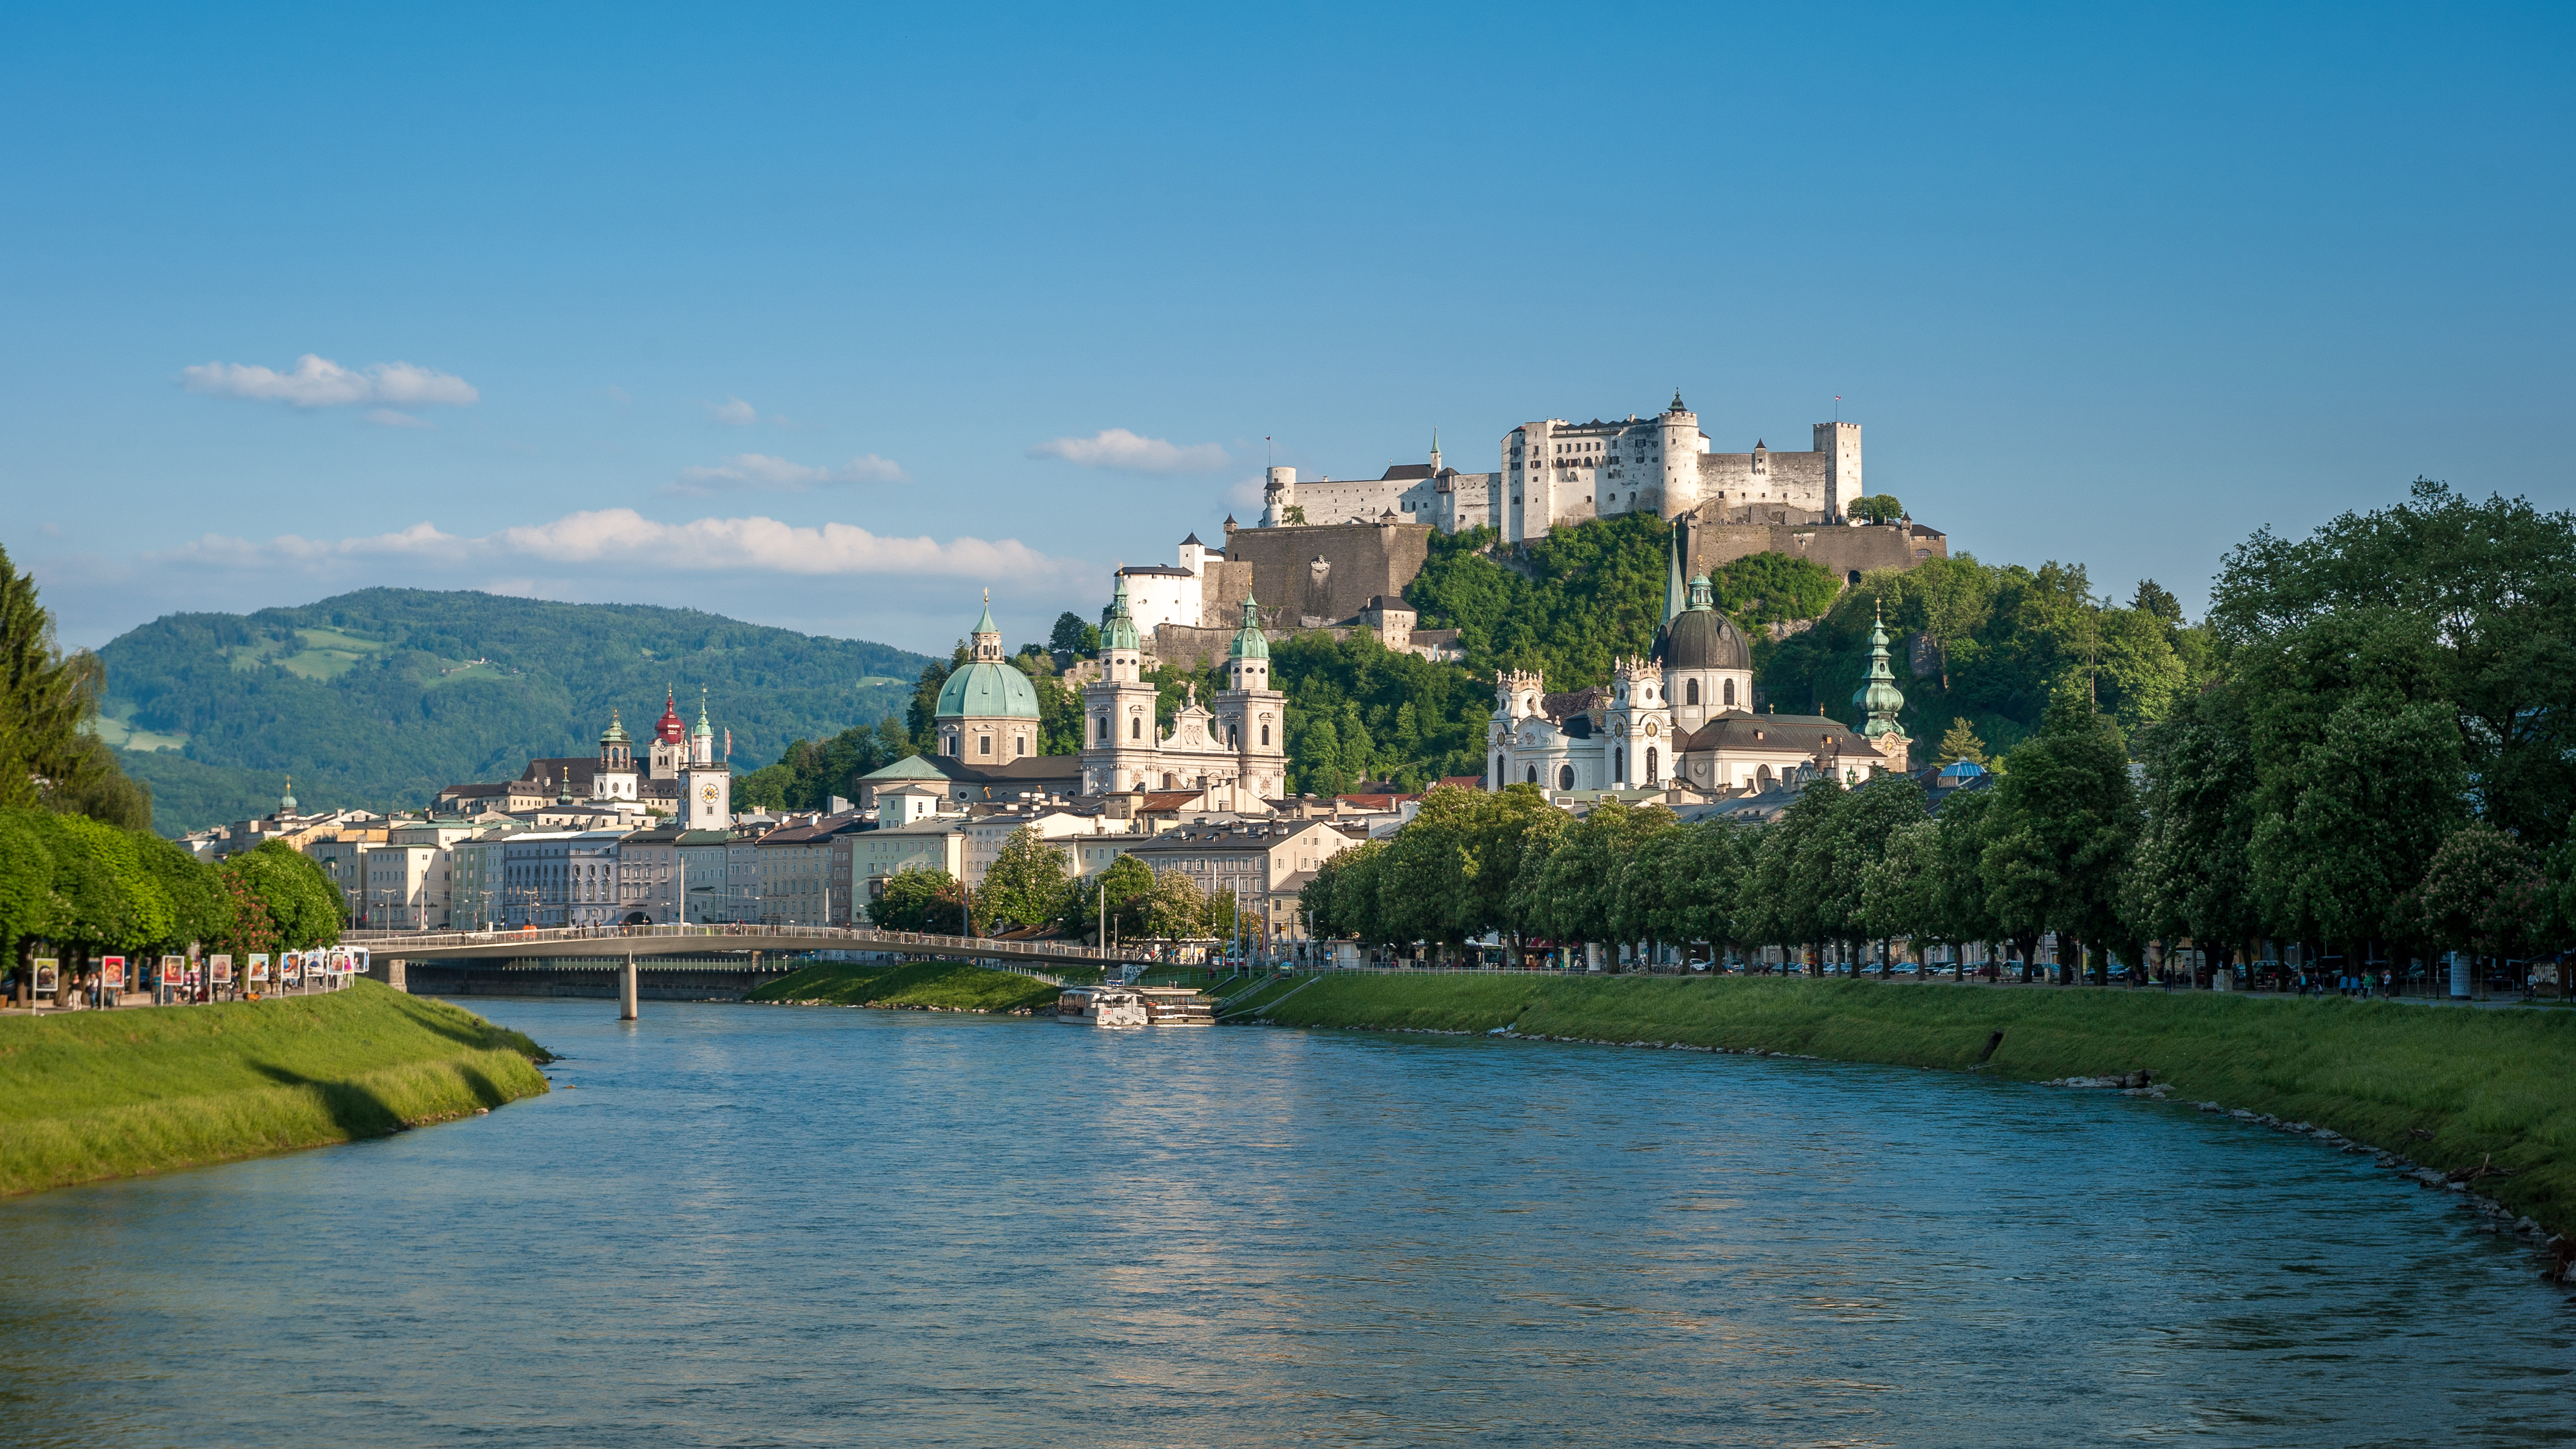 View of Salzburg's old town from the Salzach river